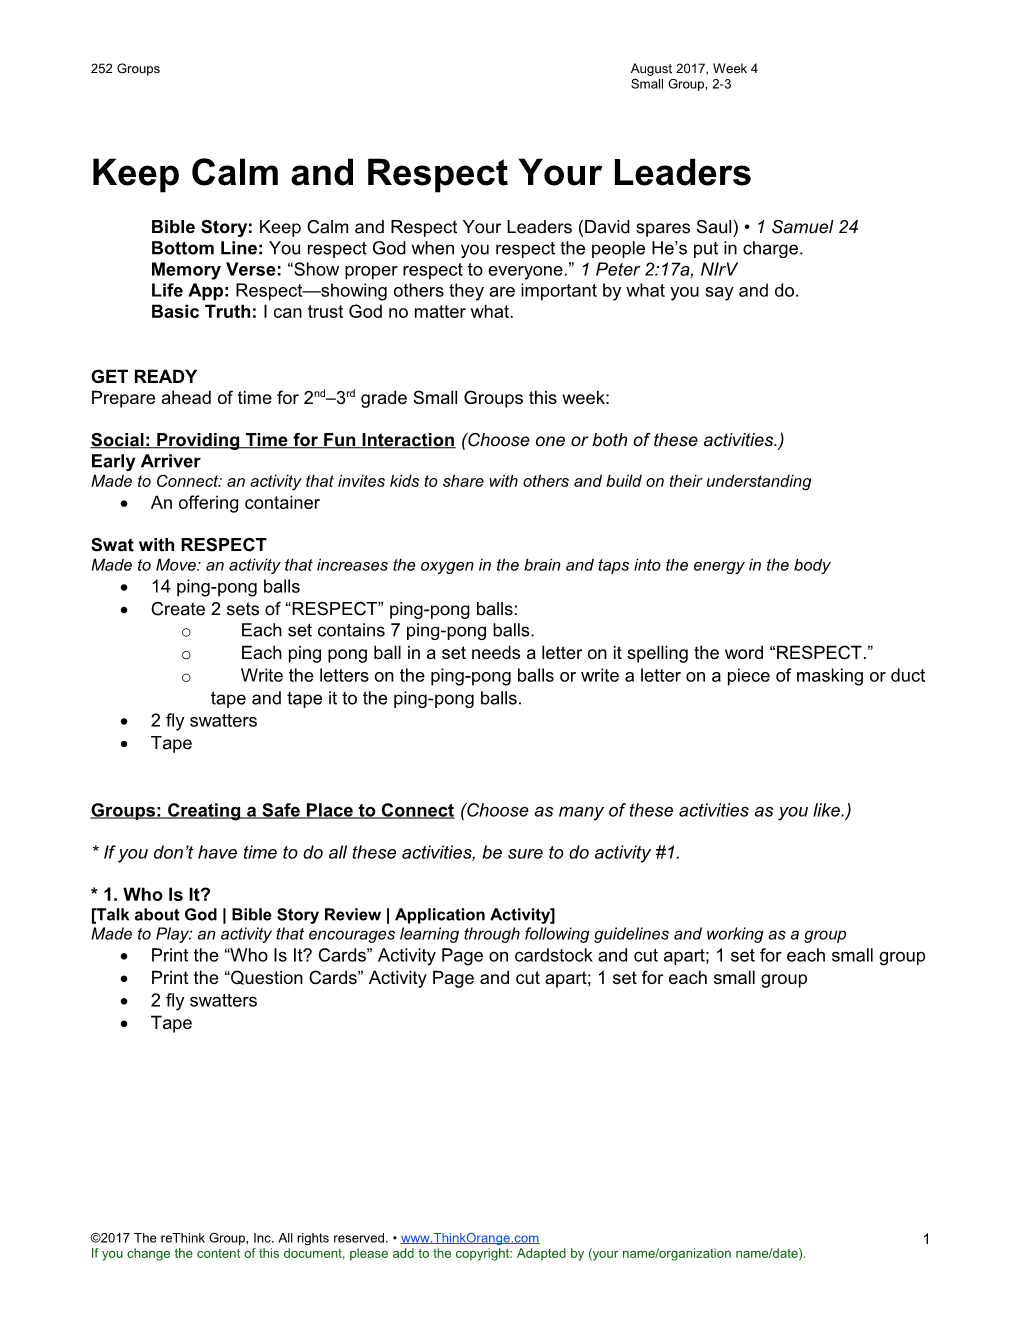 Keep Calm and Respect Your Leaders